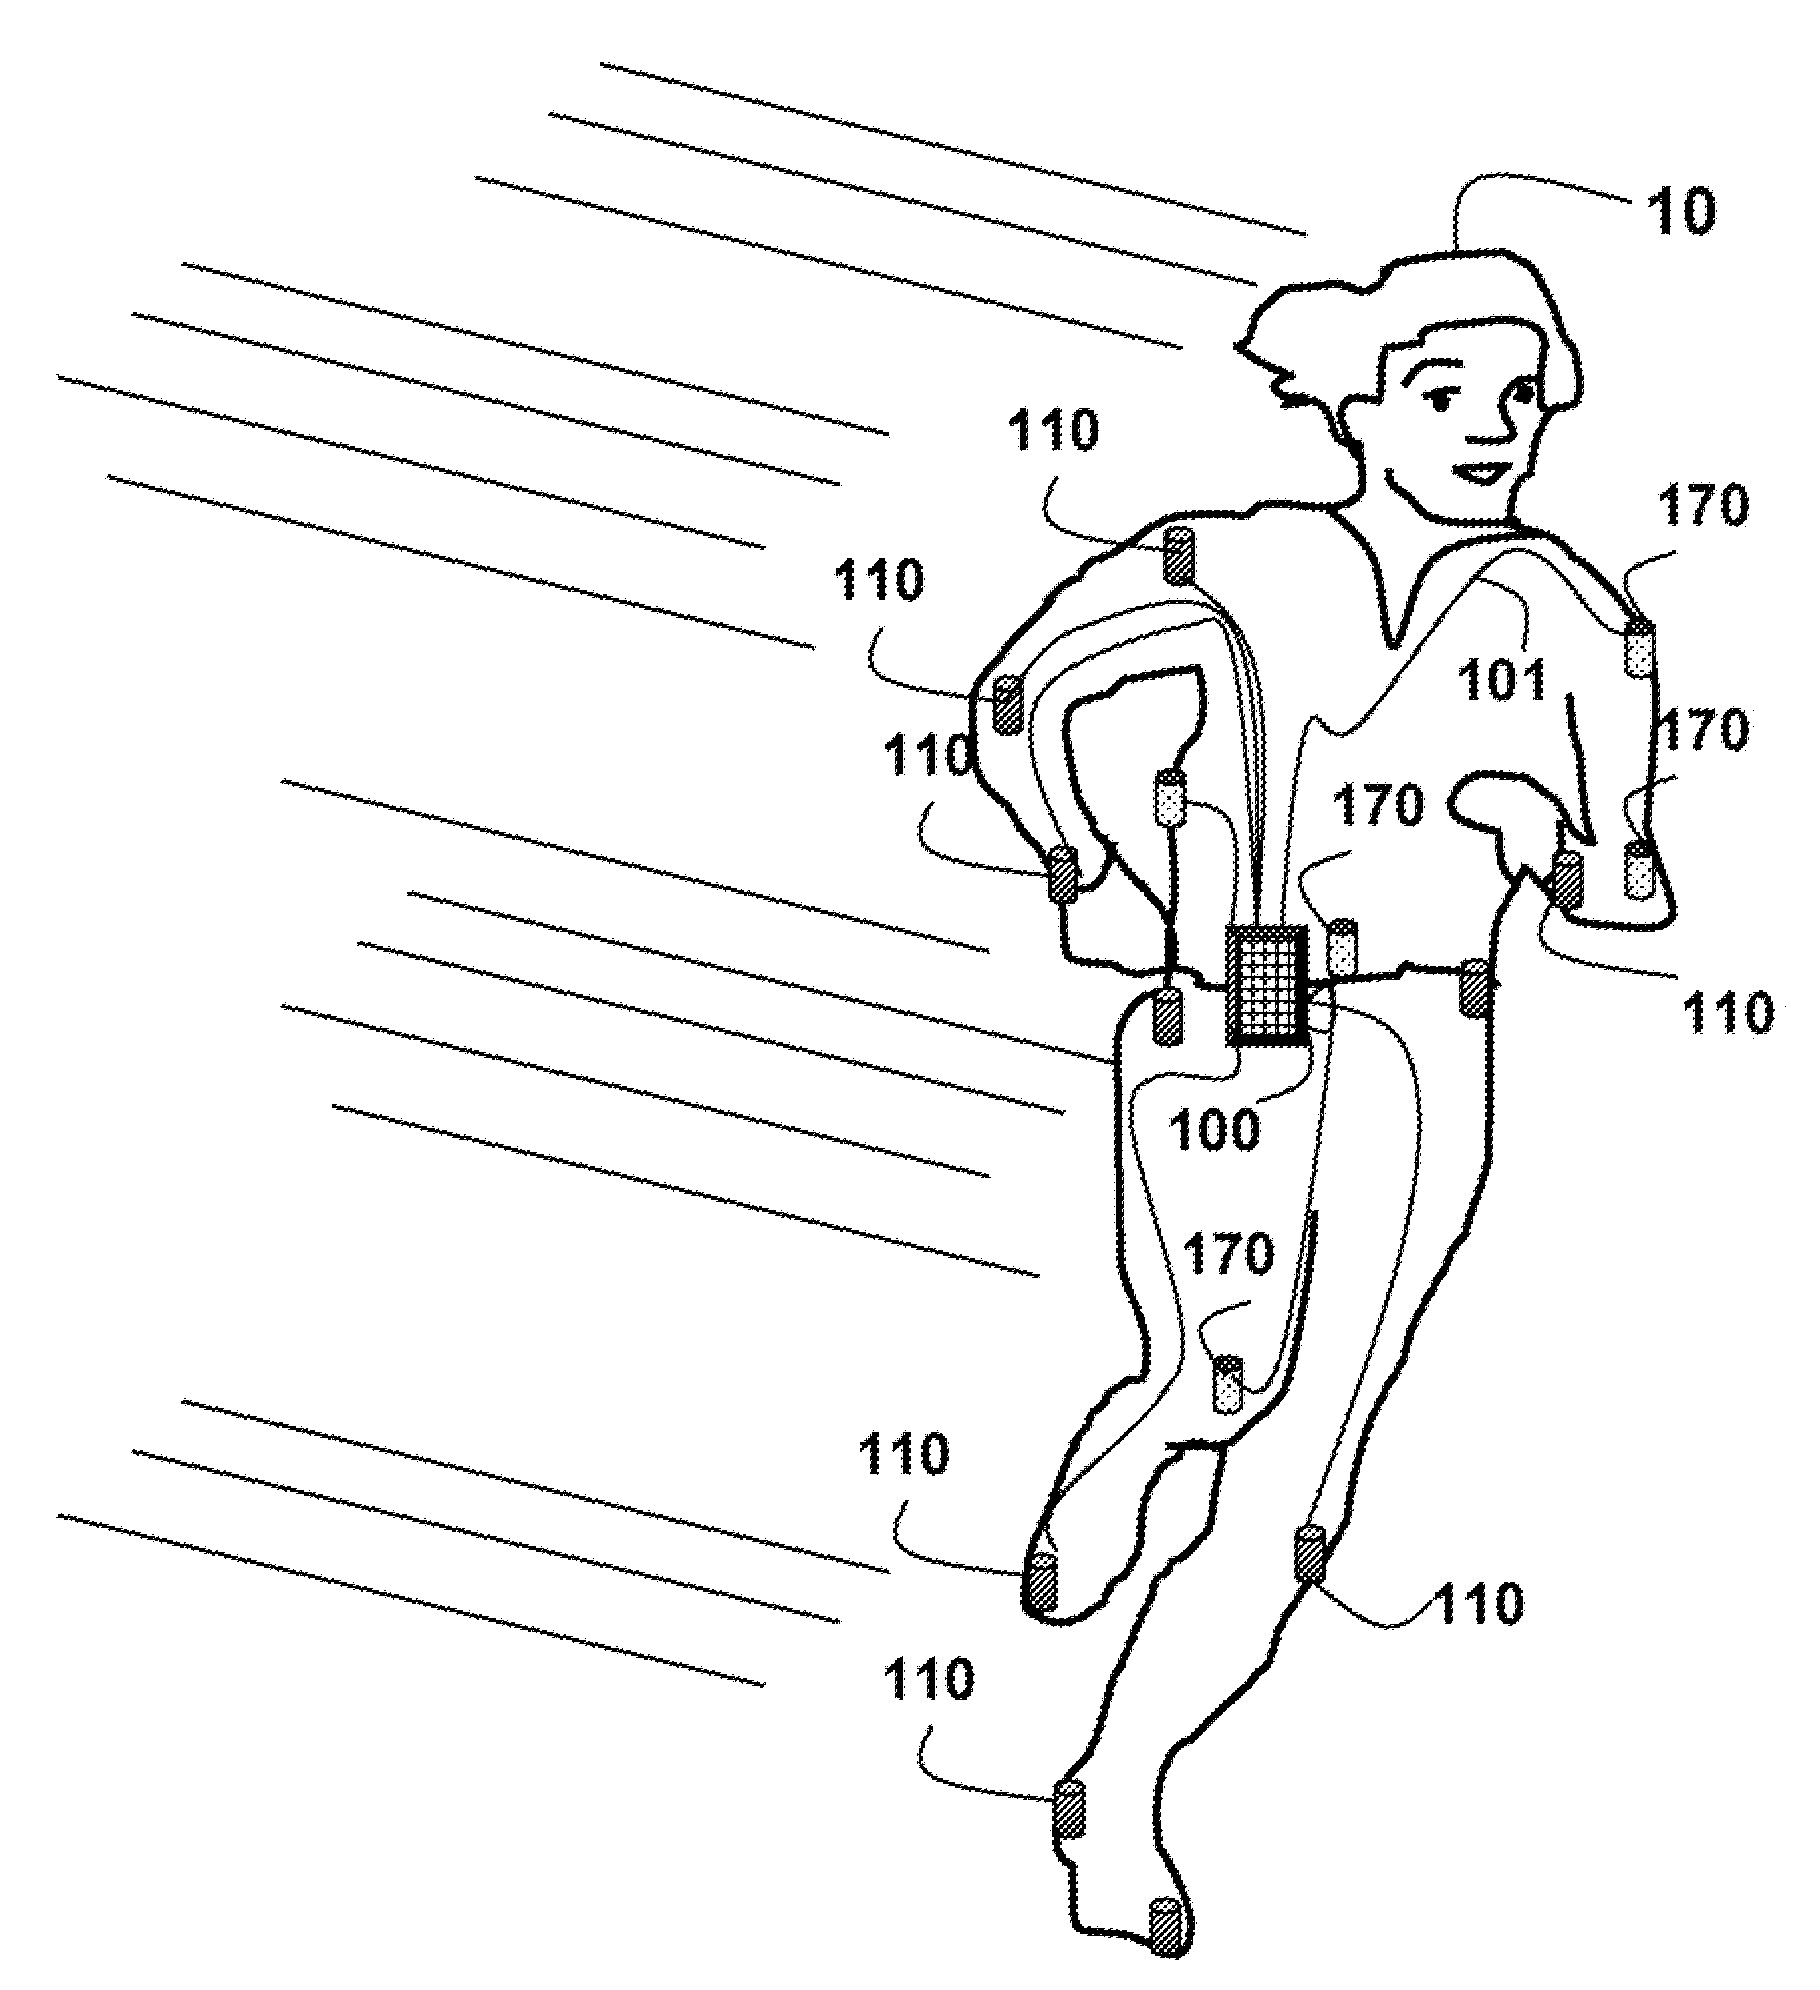 System and Method for Motion Capture in Natural Environments